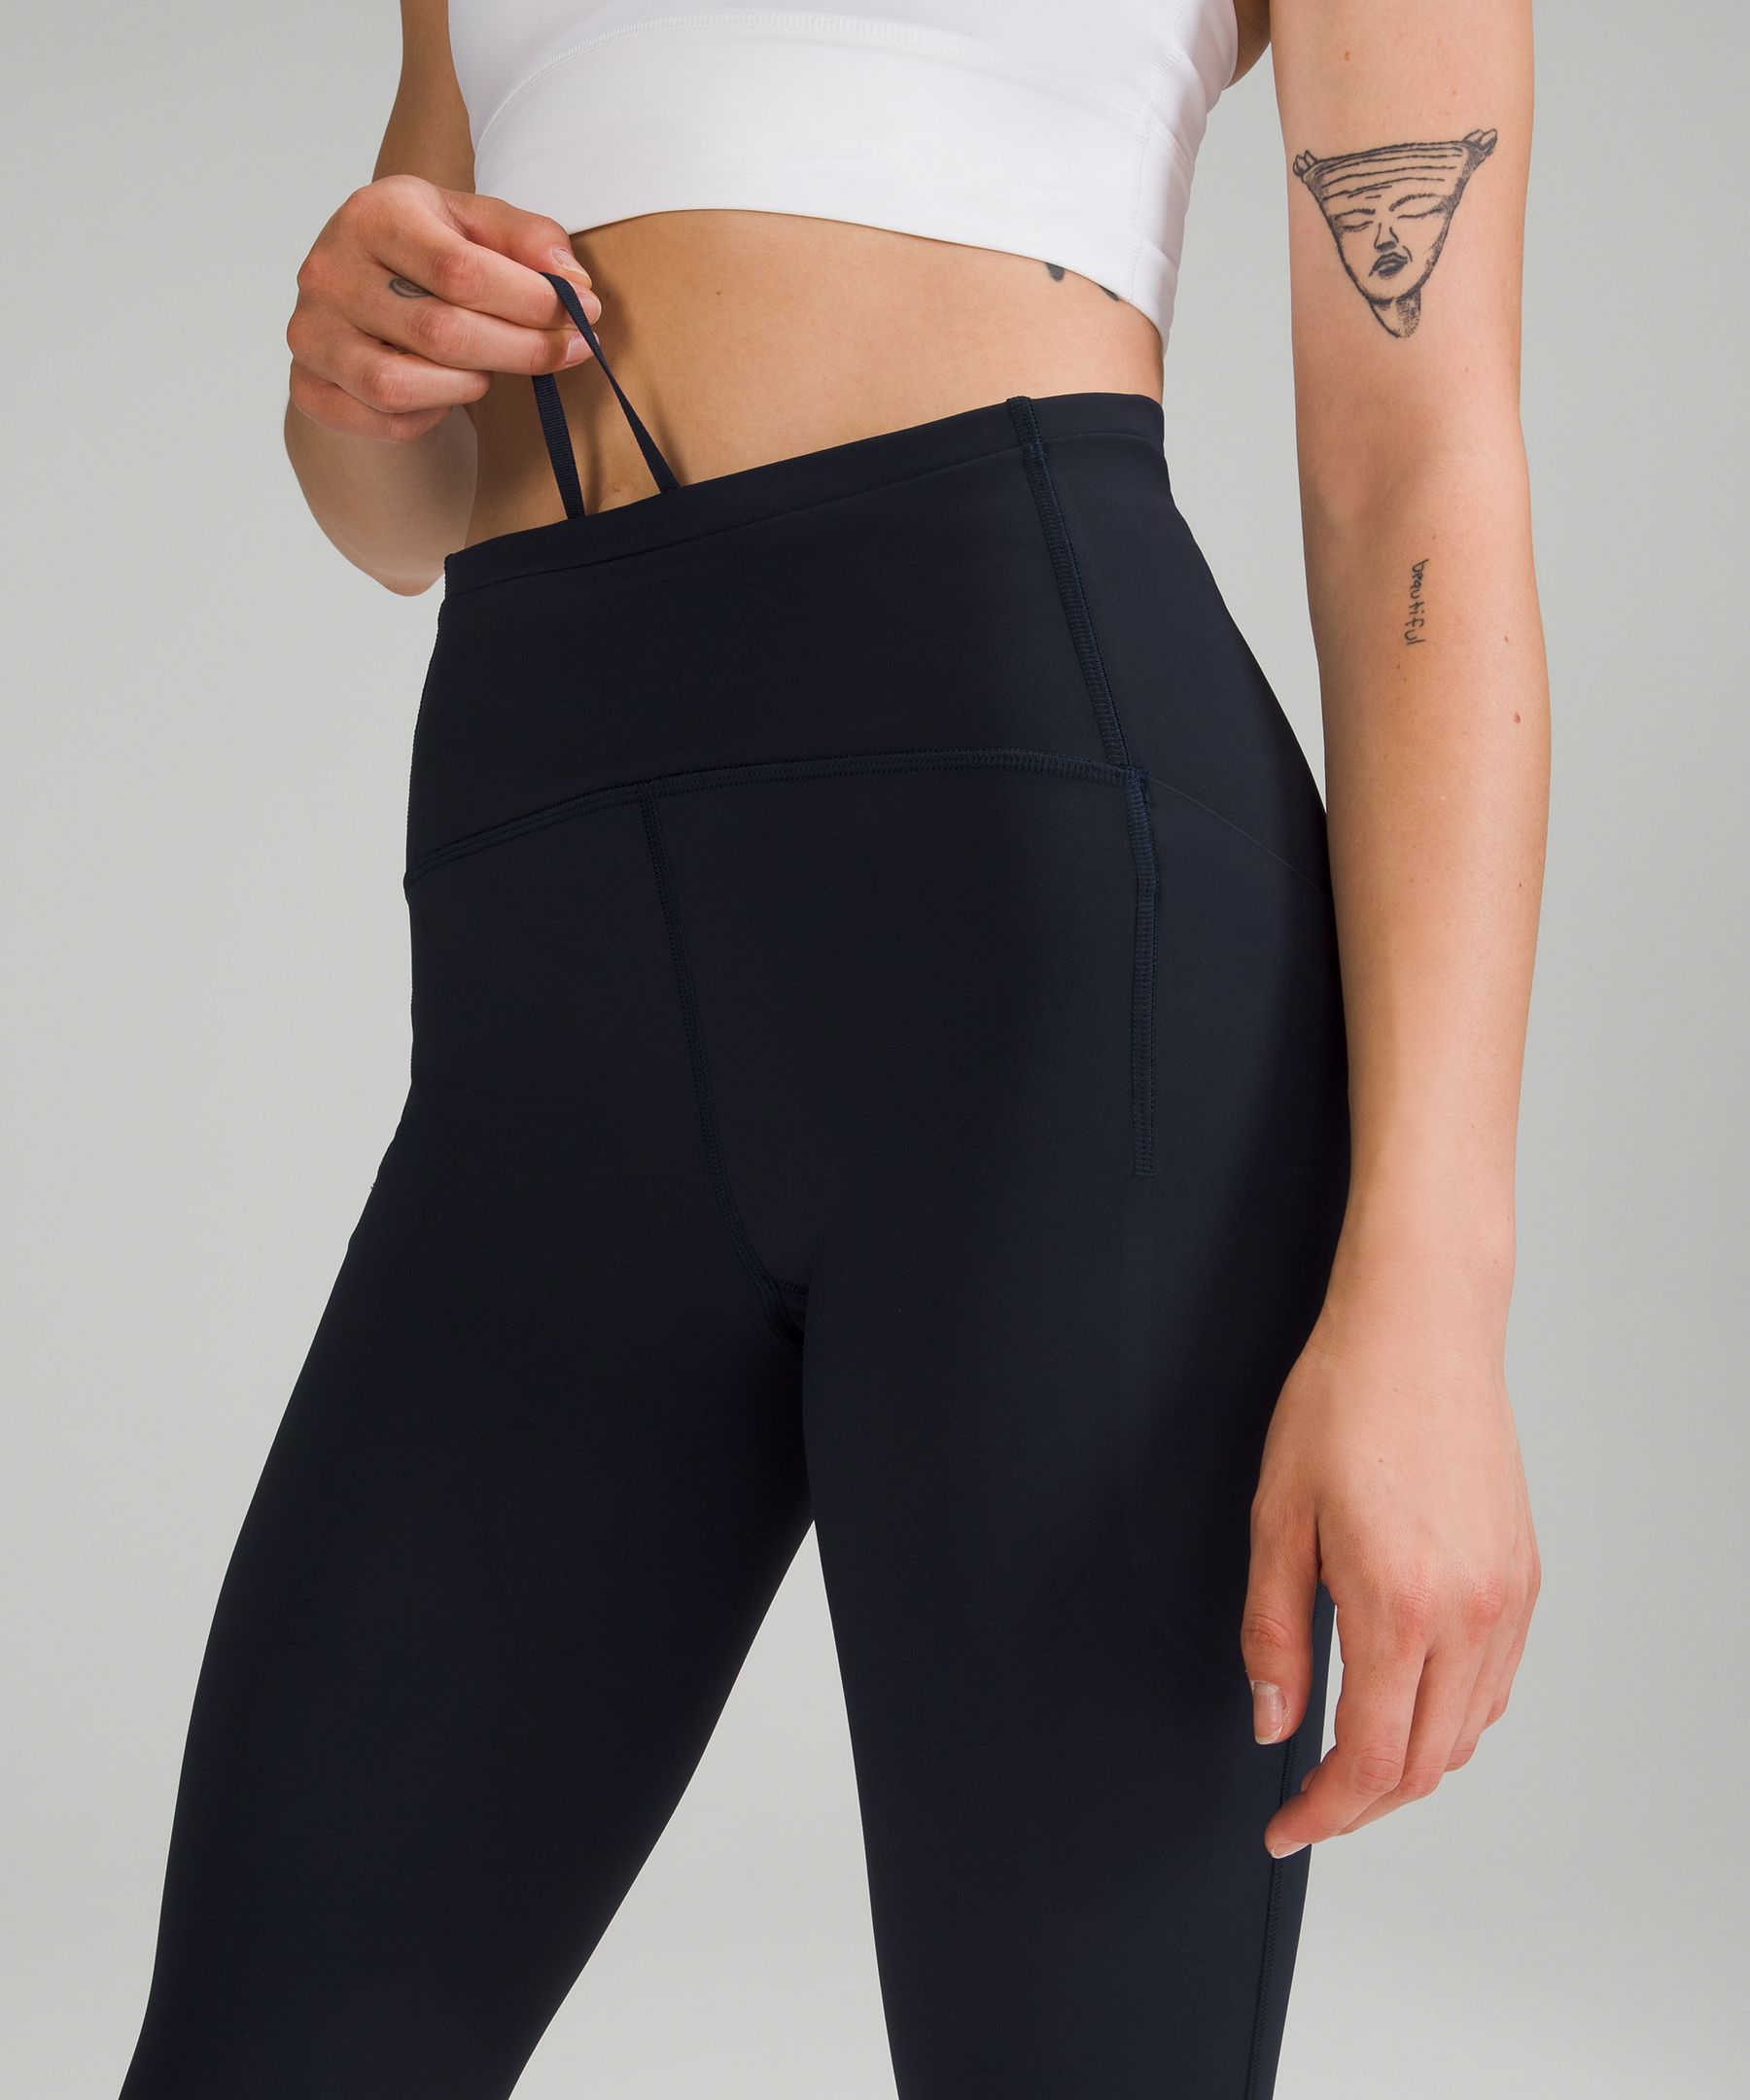 Forrest Chase - All 👏 about 👏 those 👏 pockets 👏 The lululemon Swift  Speed Tights are powered by Luxtreme™ fabric, with plenty of space to fit  your phone and a hit